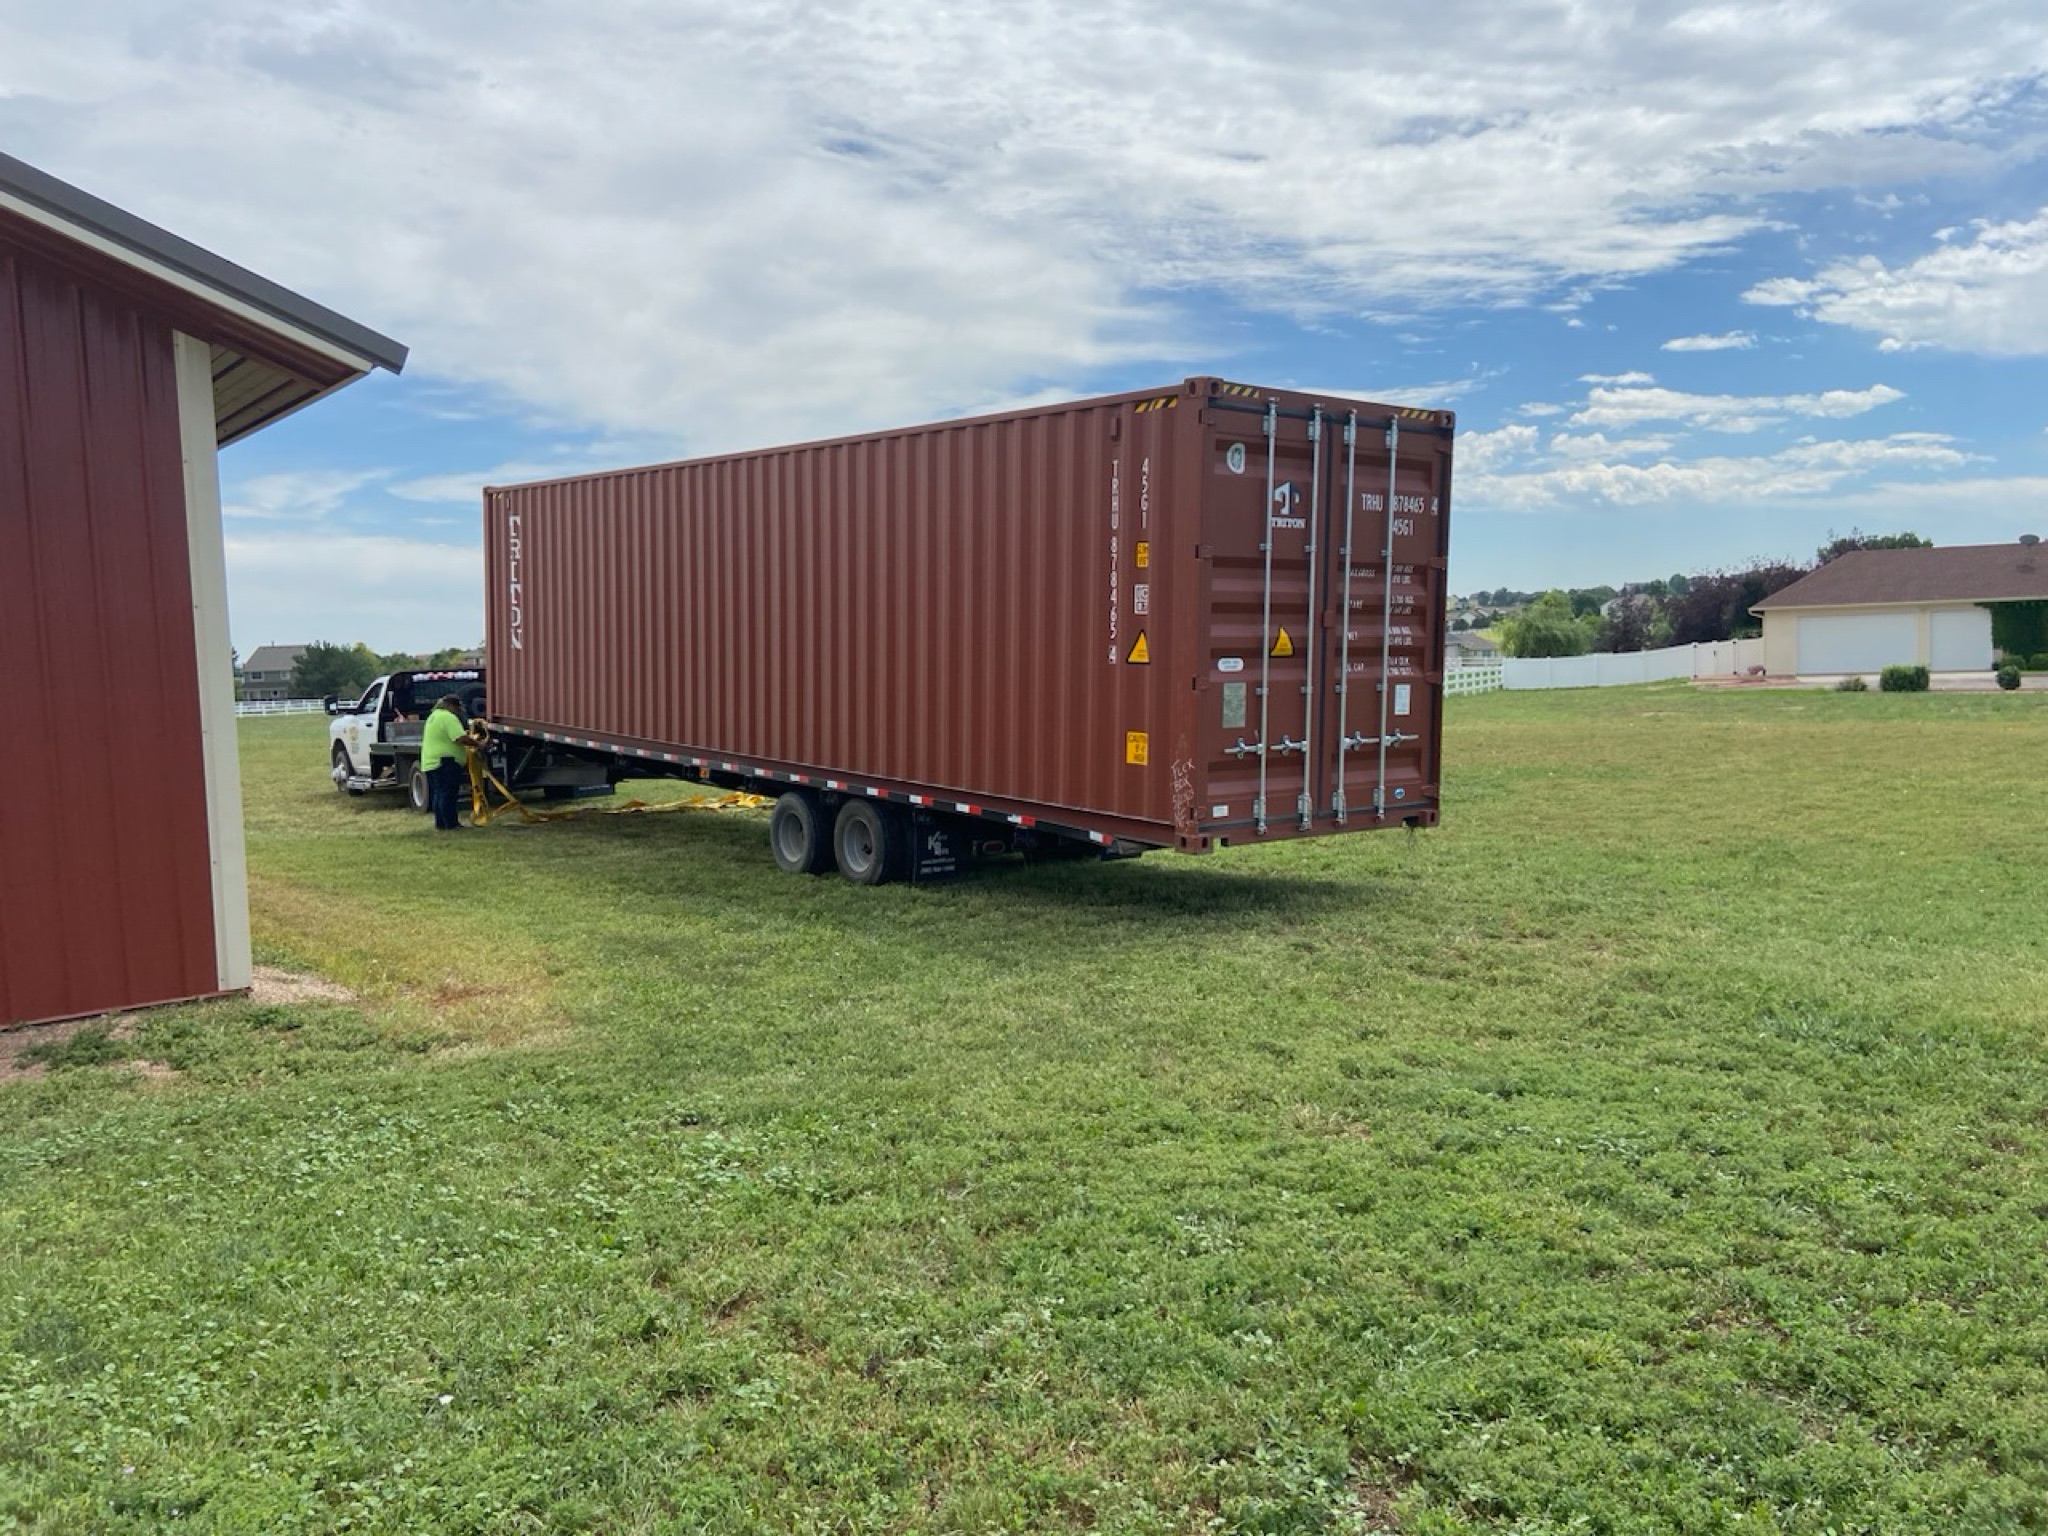 Shipping a container that's insured through Container Transport